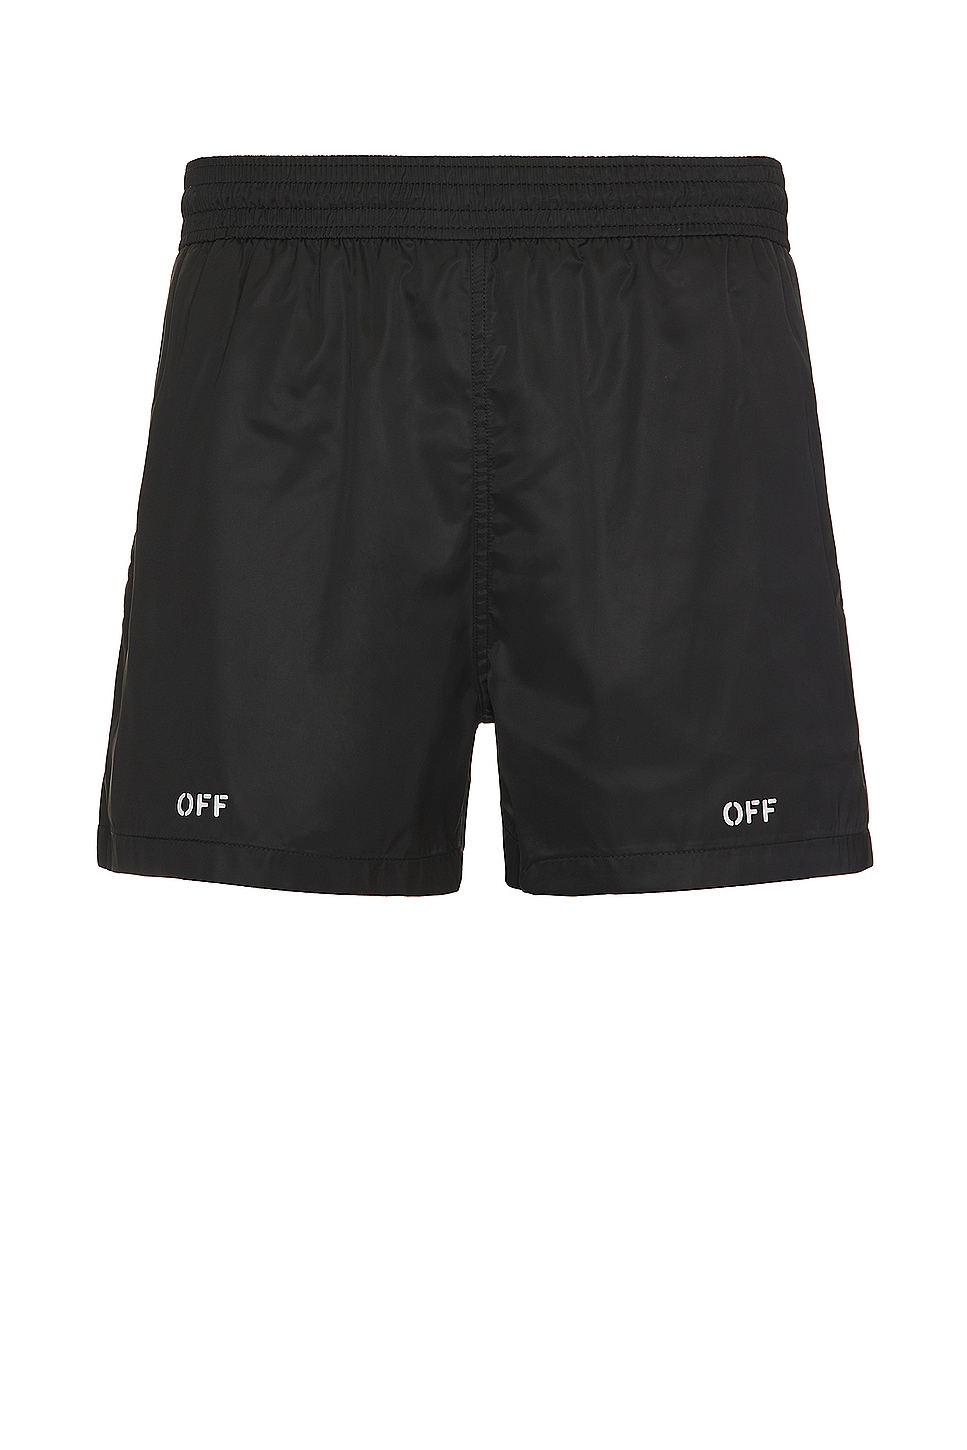 Image 1 of OFF-WHITE Stamp Swimshorts in Black & White